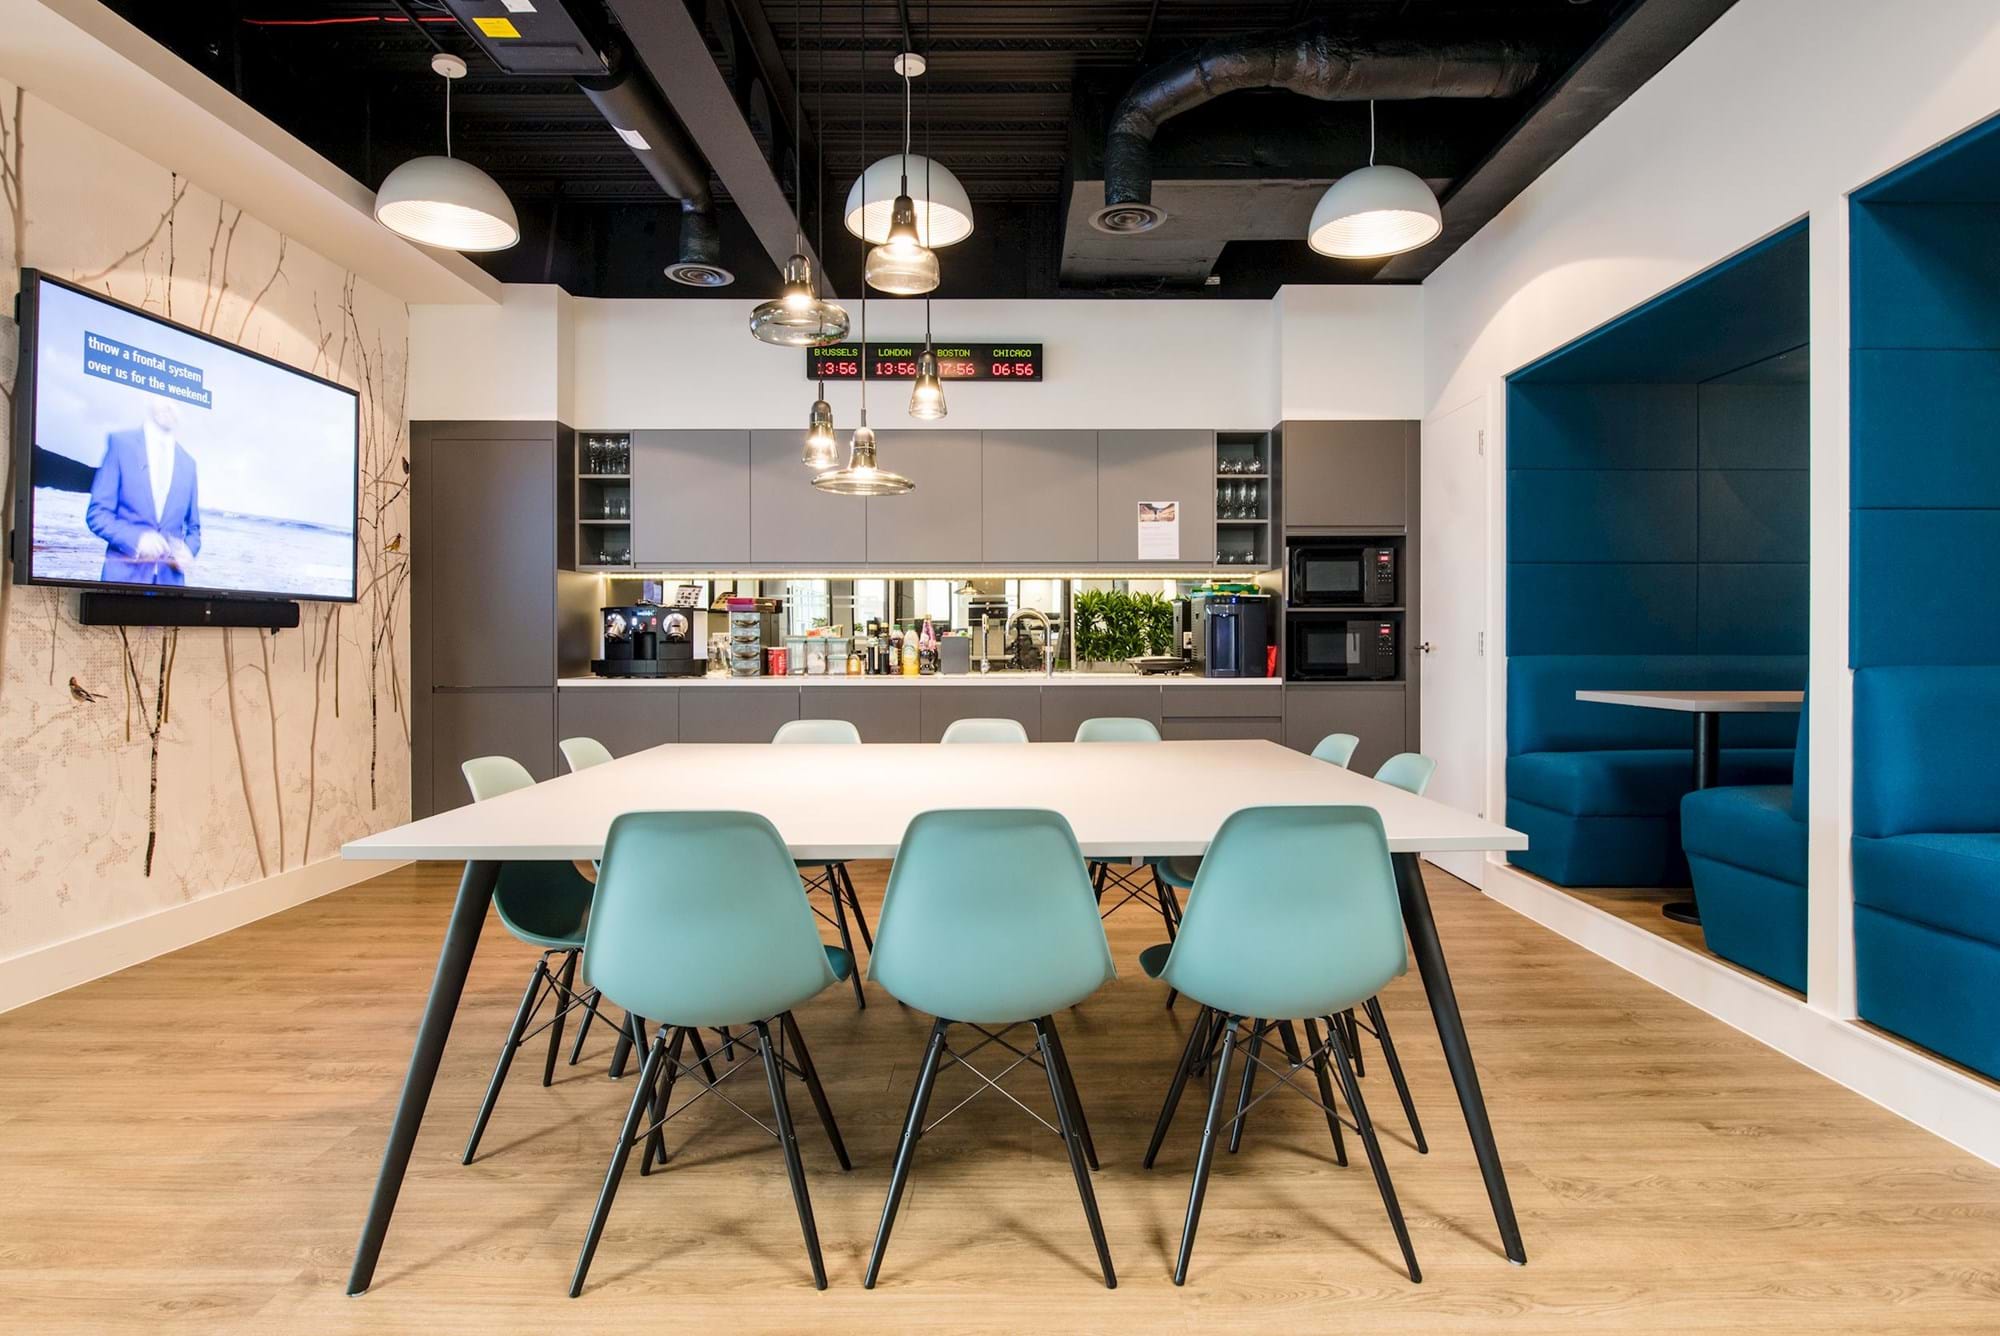 Modus Workspace office design, fit out and refurbishment - Charles River Associates Cambridge - Modus-Charles-Rivers-Associates-Cambridge-36.jpg